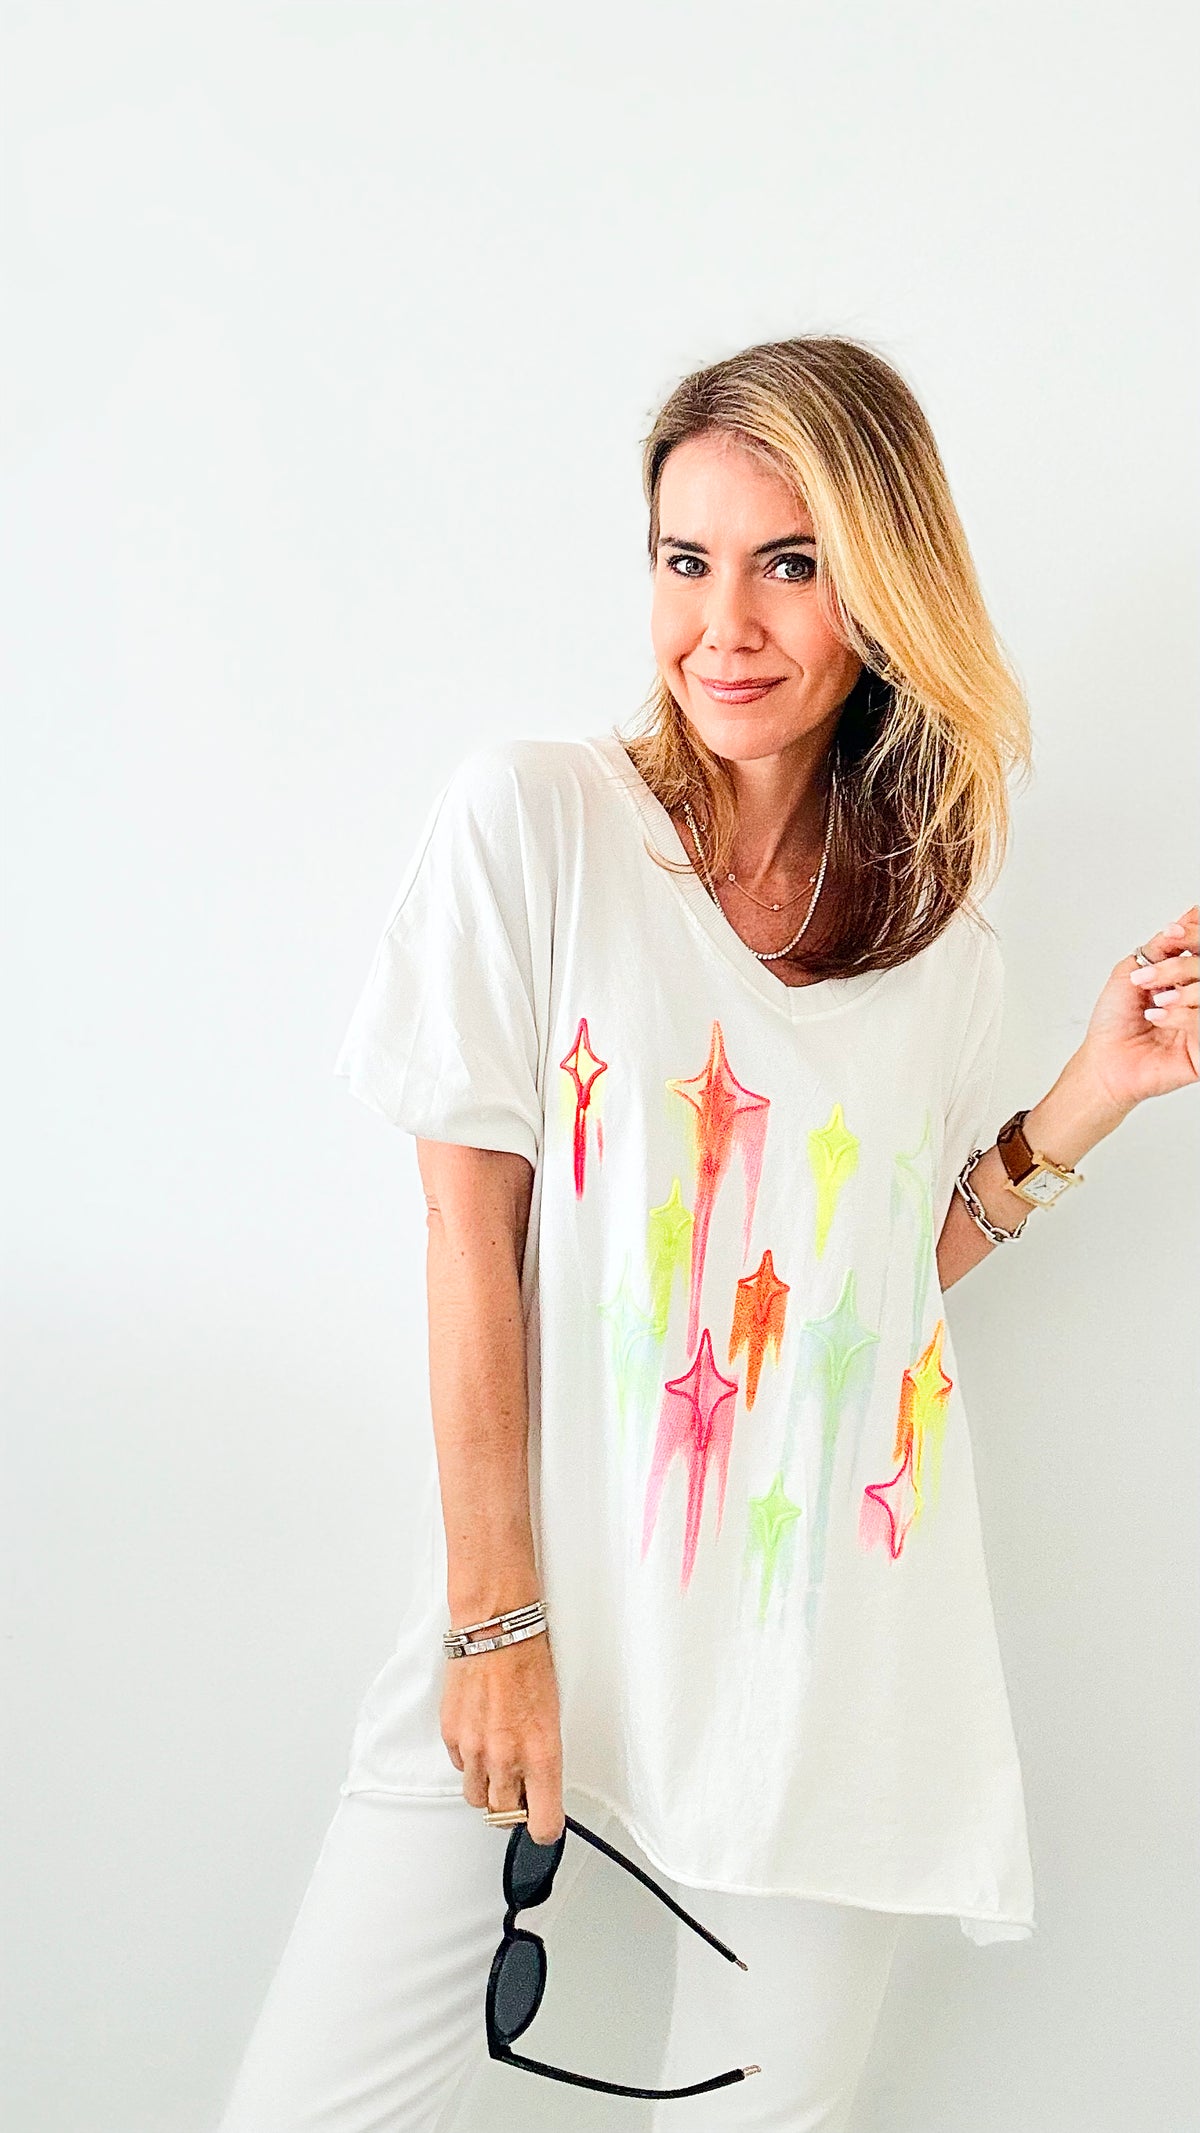 Starburst Italian Tee - White-110 Short Sleeve Tops-Italianissimo-Coastal Bloom Boutique, find the trendiest versions of the popular styles and looks Located in Indialantic, FL